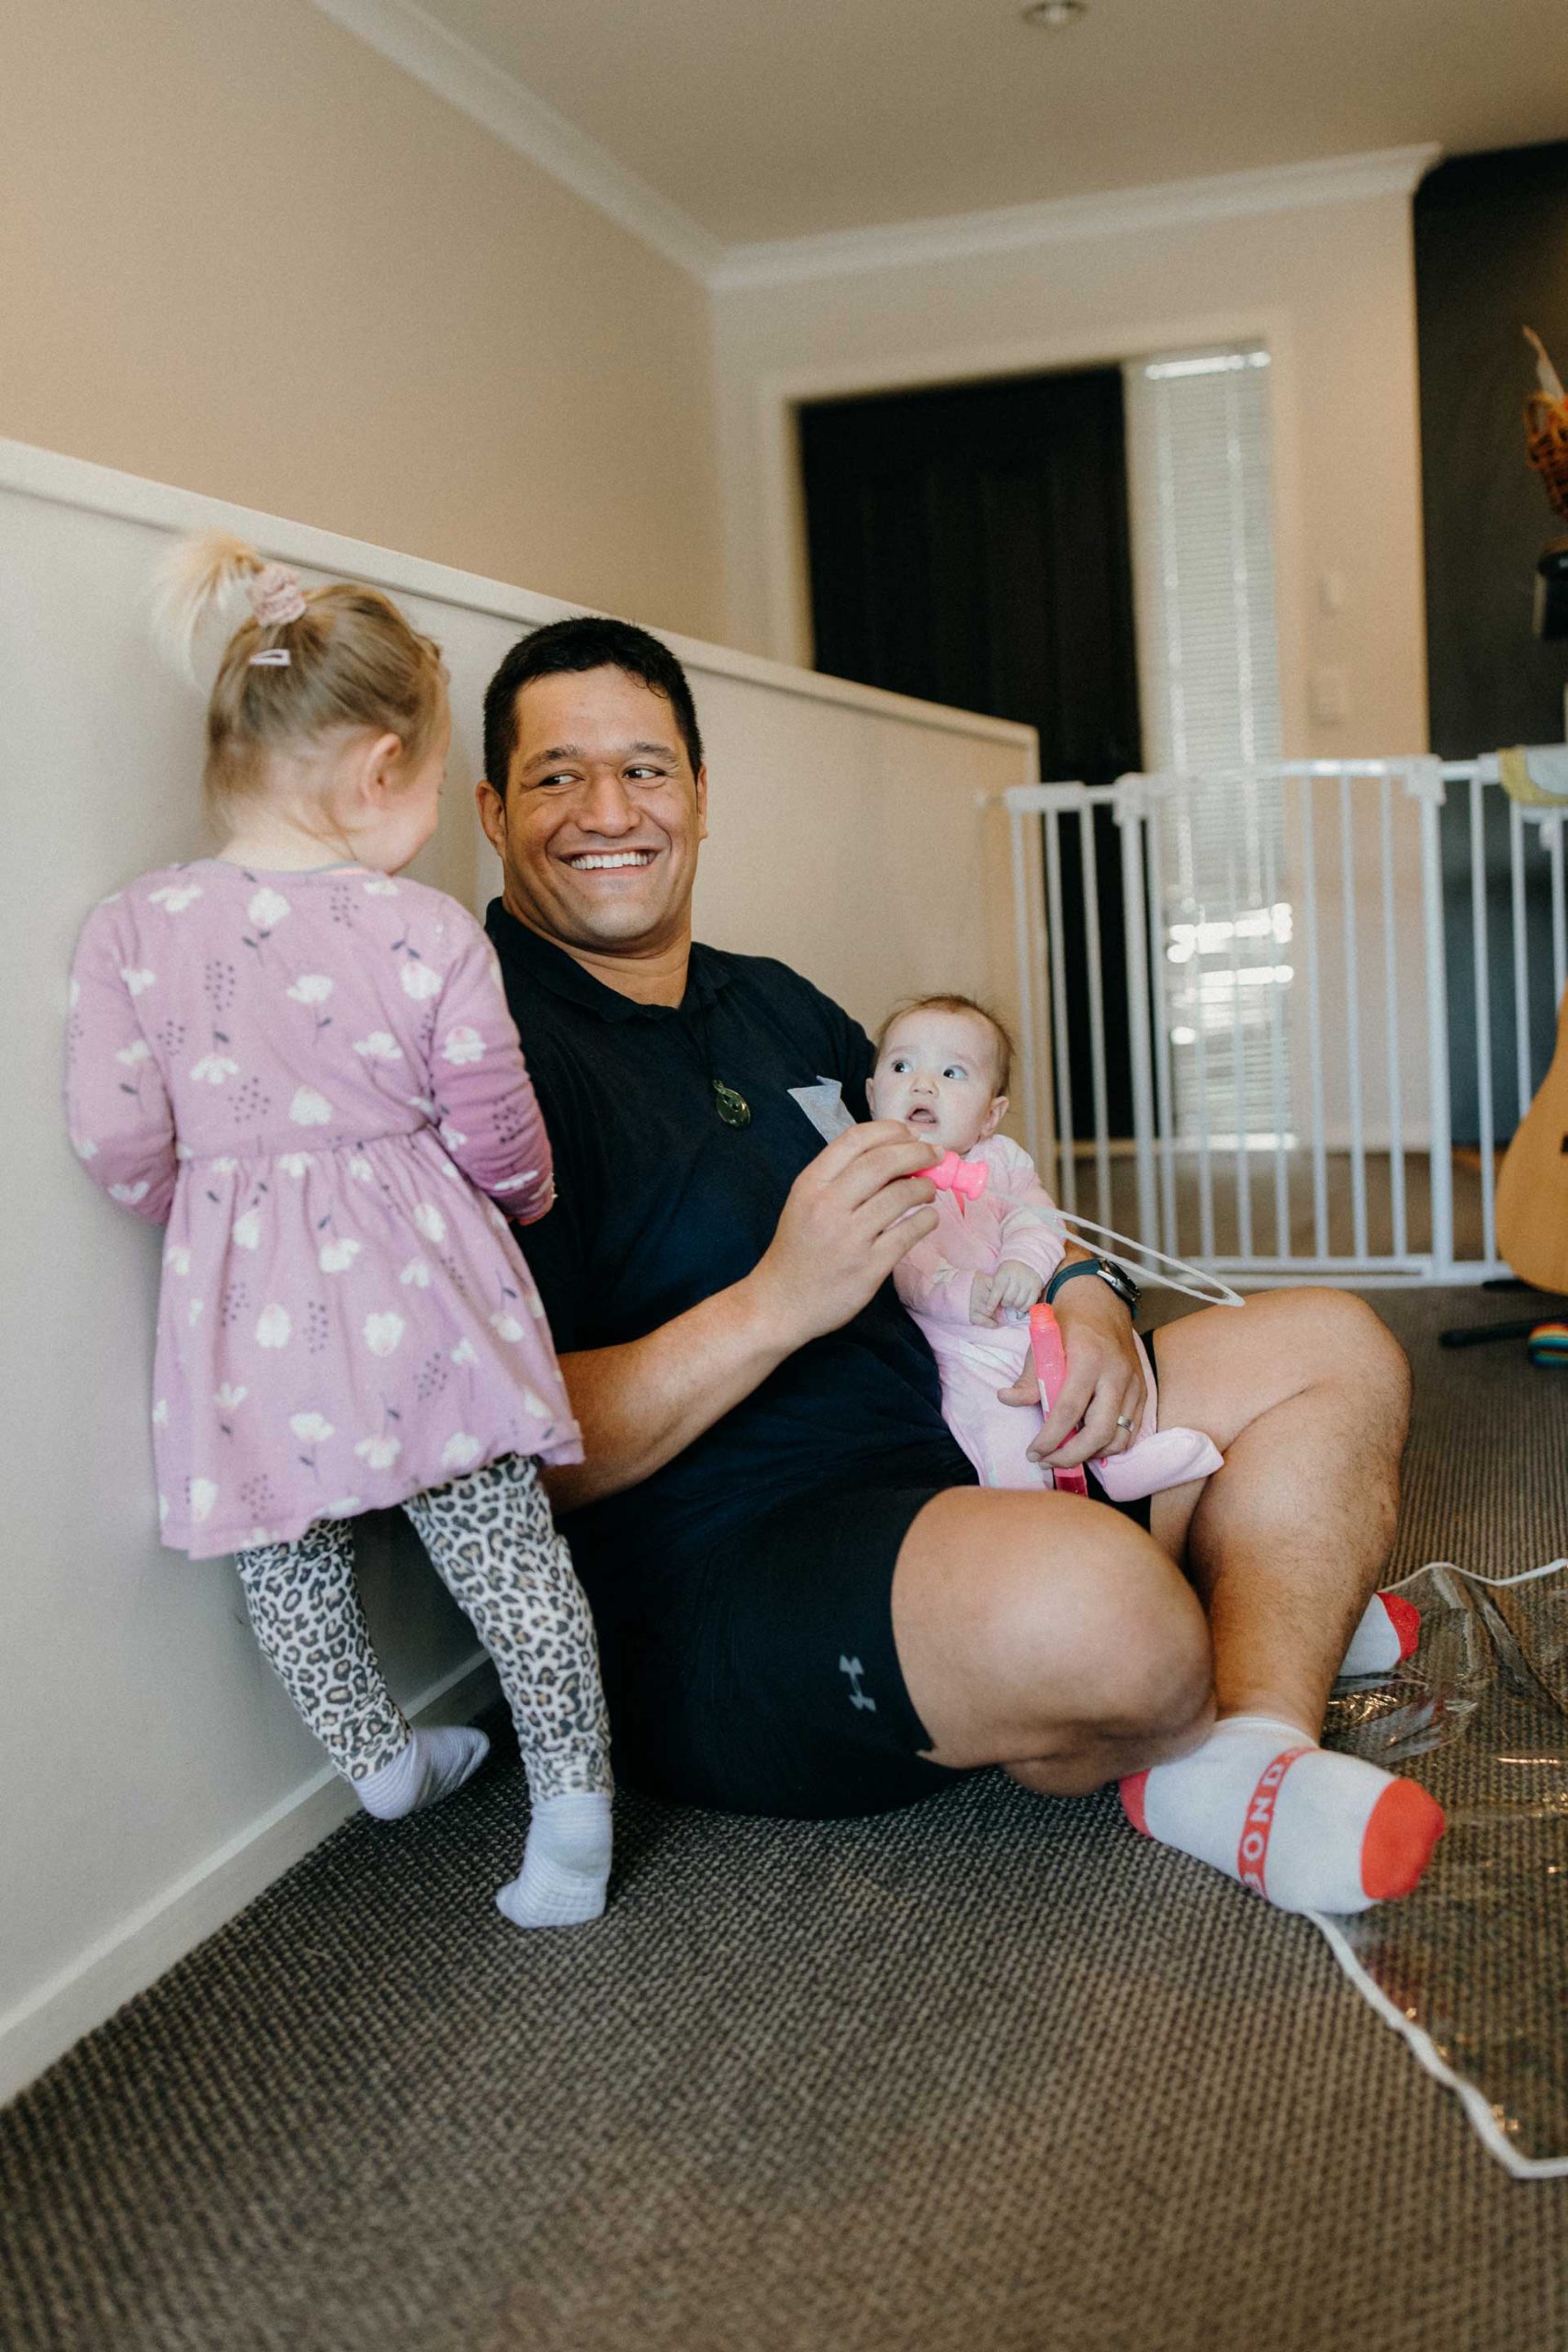 kiwi dads of jonathan fuimaono of anz bank playing with children photos by sarah weber photography